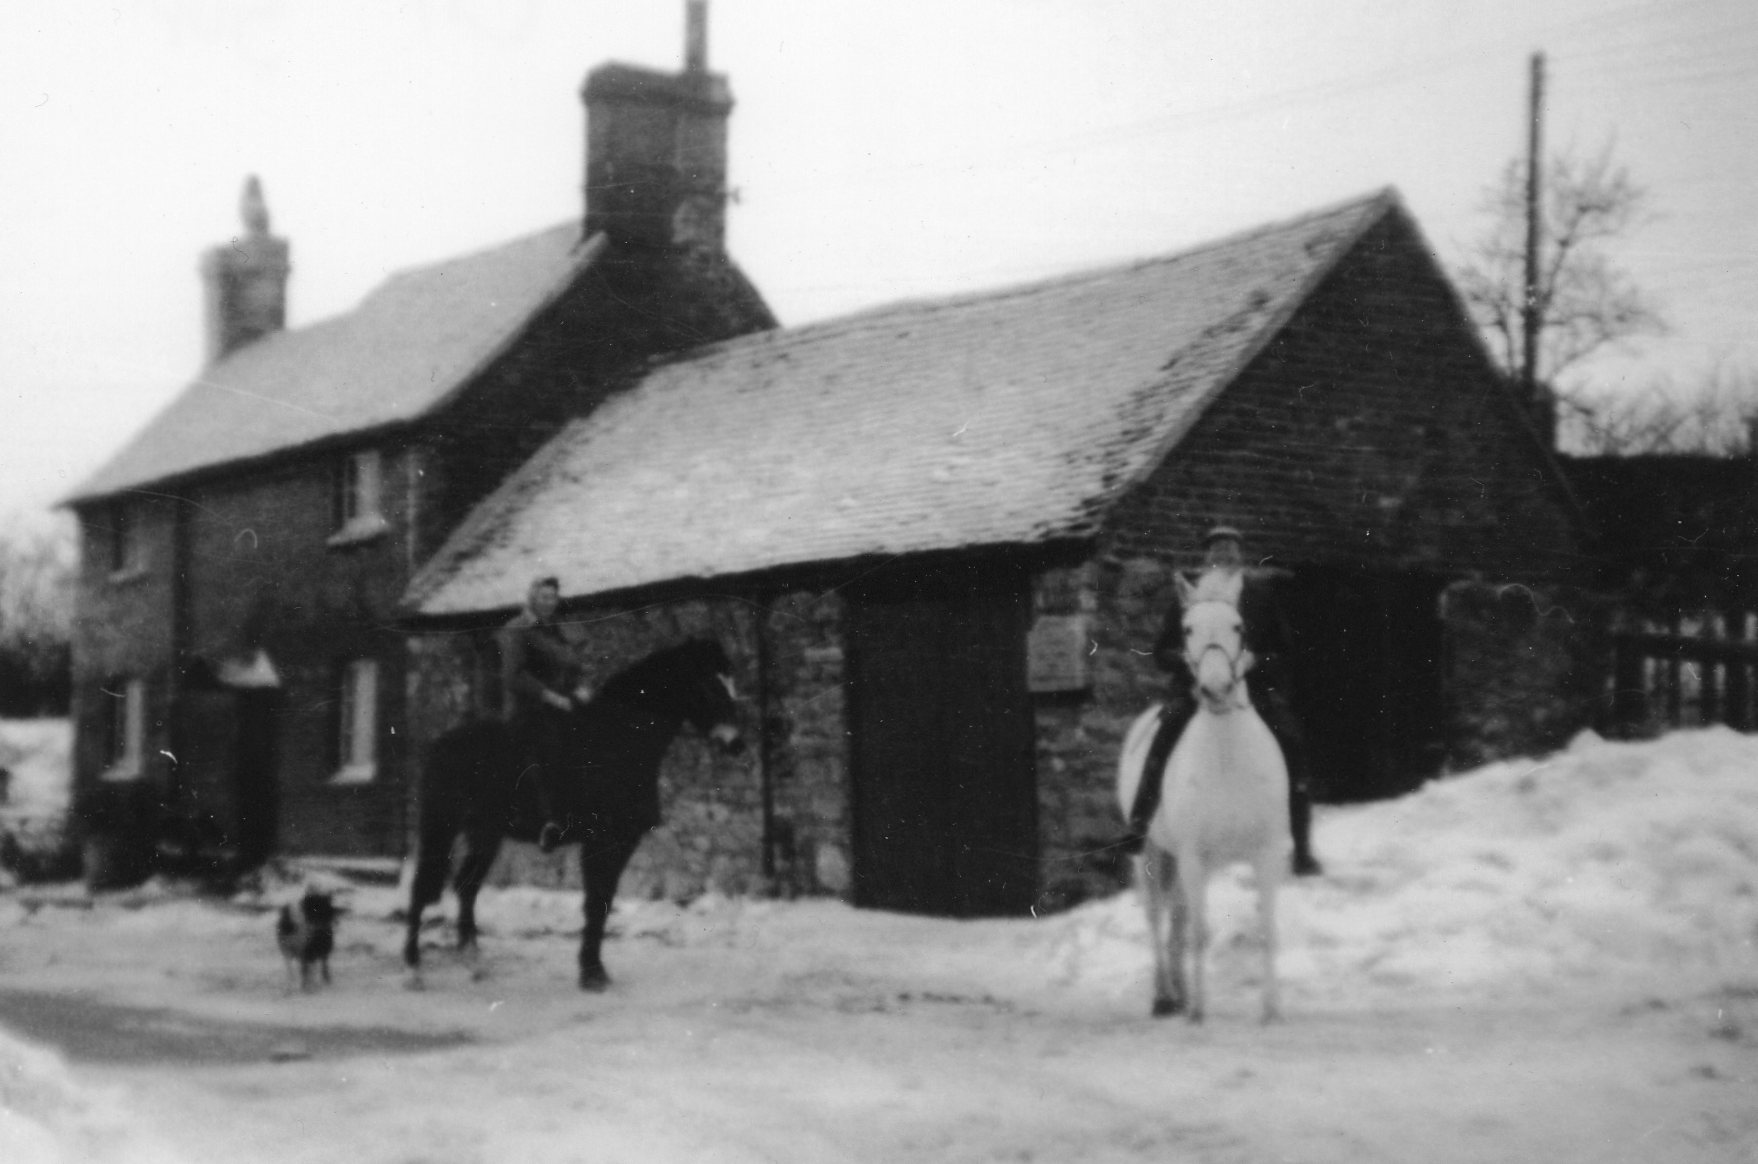 February 1963 Roz & Dick Boughton outside The Old Forge